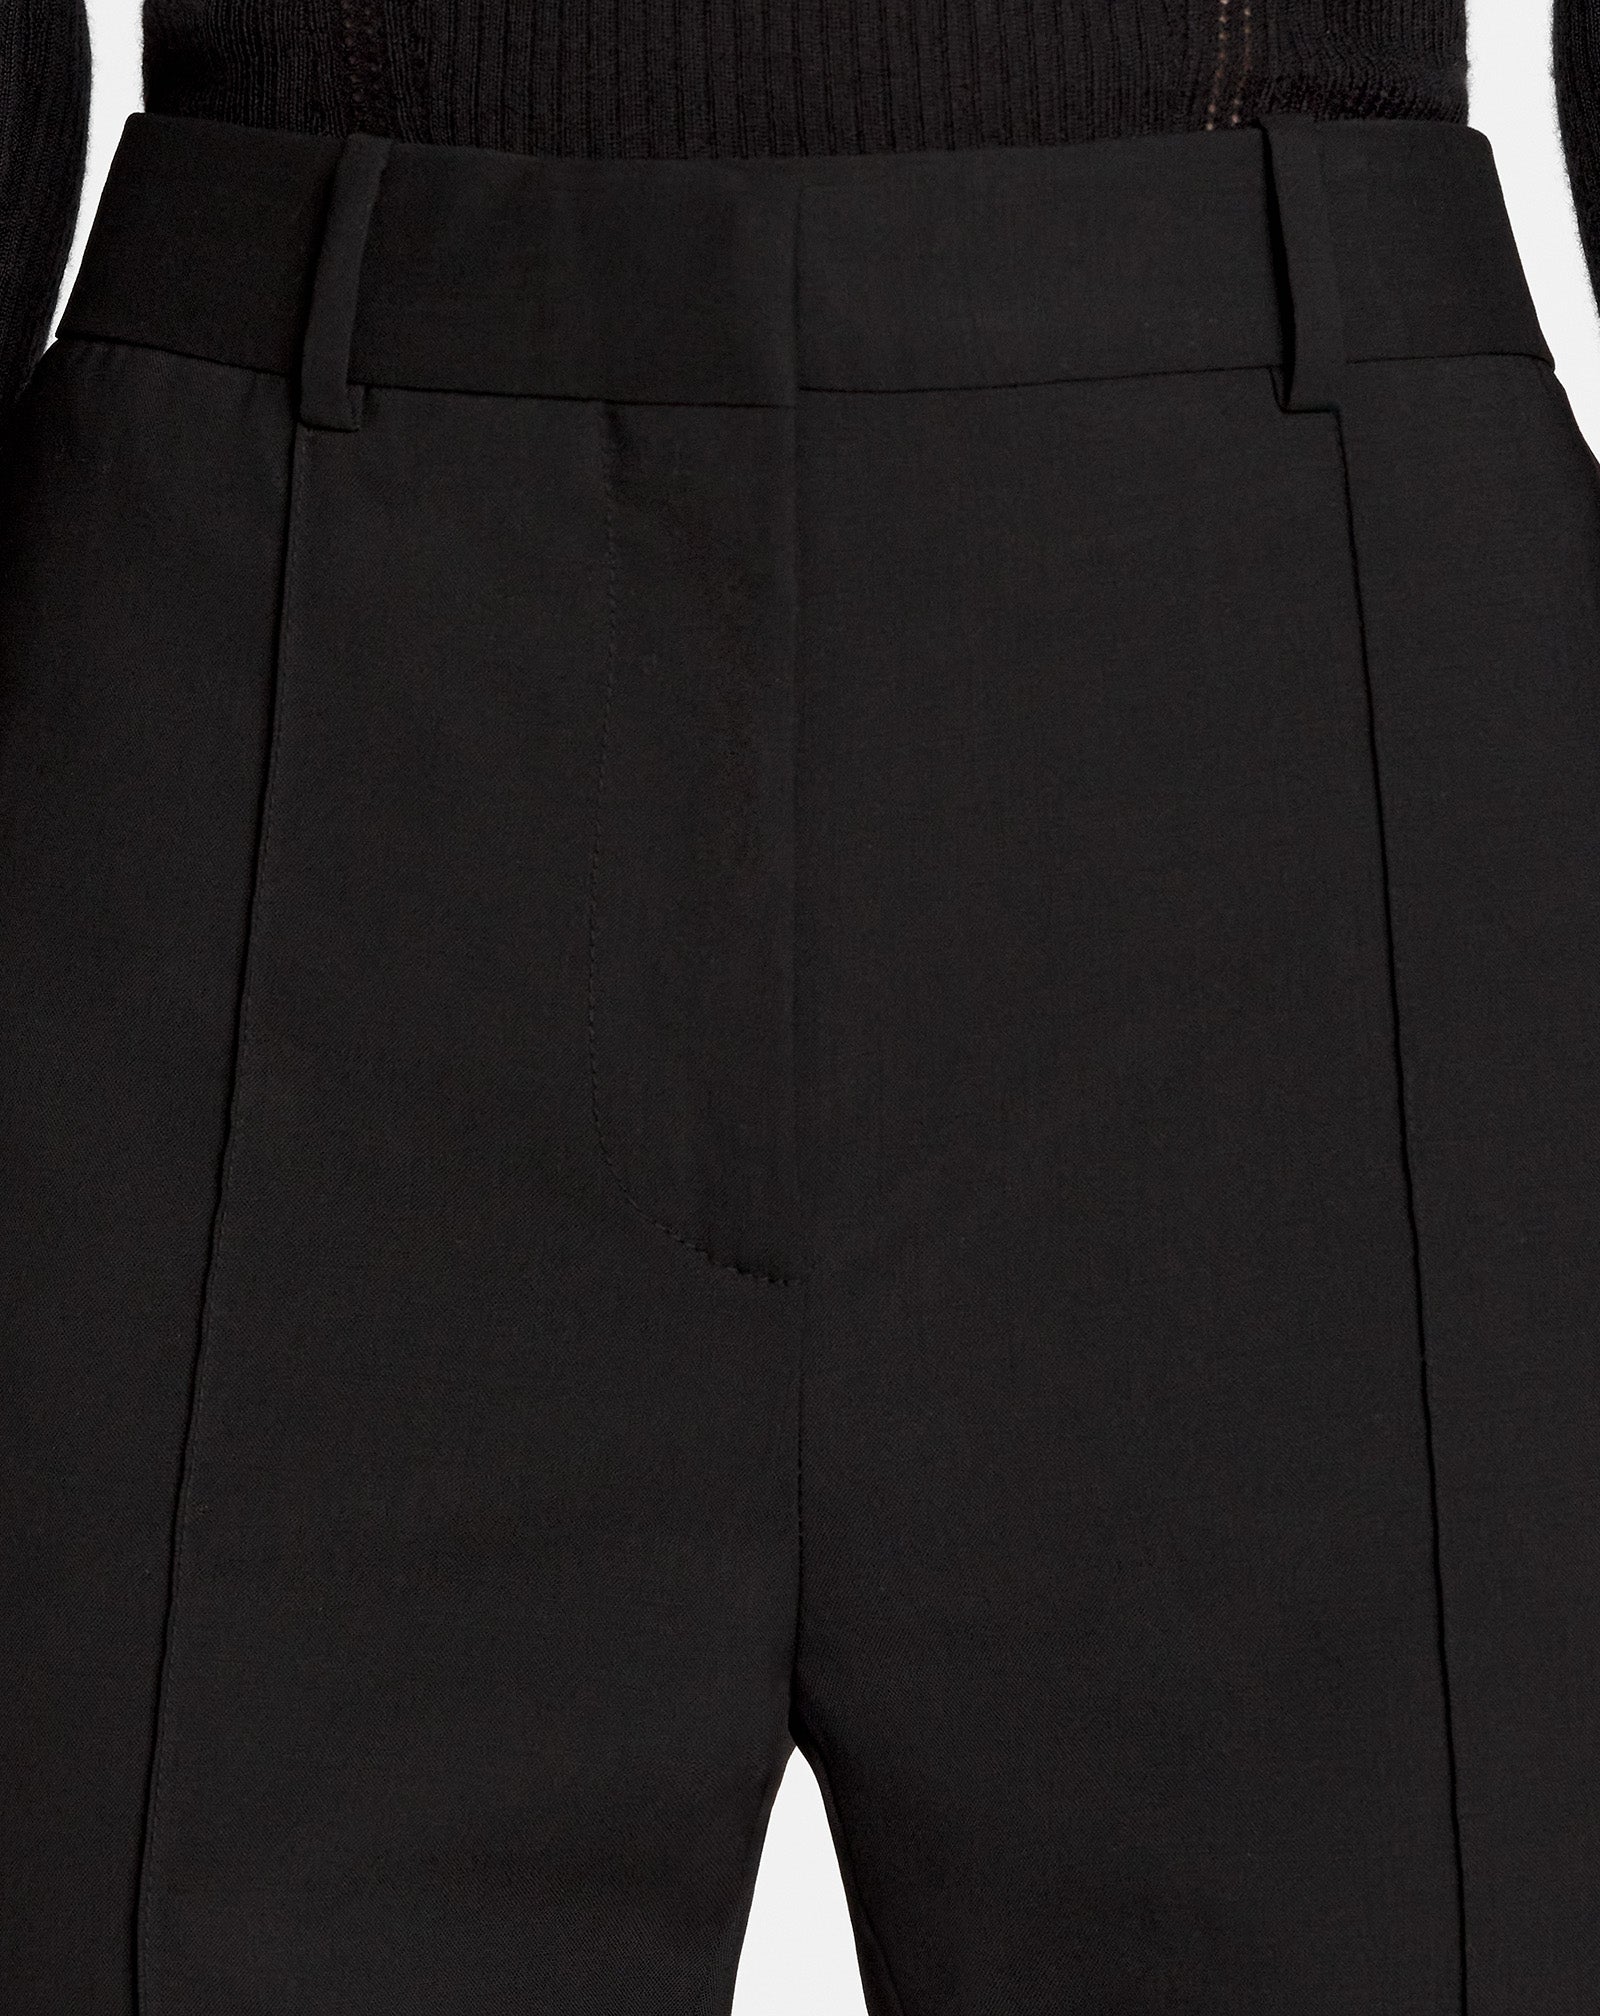 TAPERED PANTS, BLACK